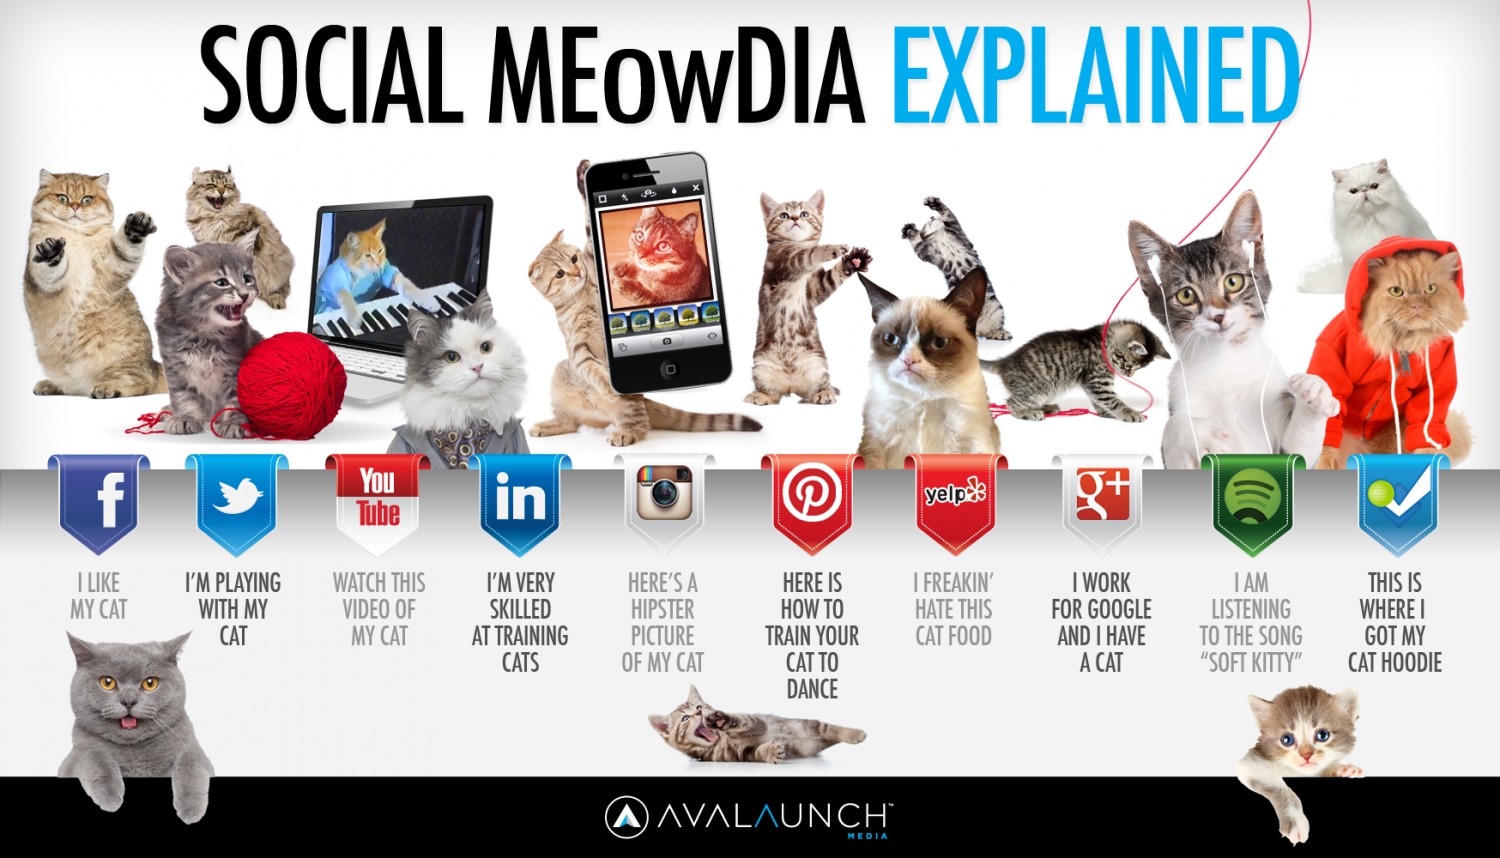 The Power of Cats and Digital Marketing